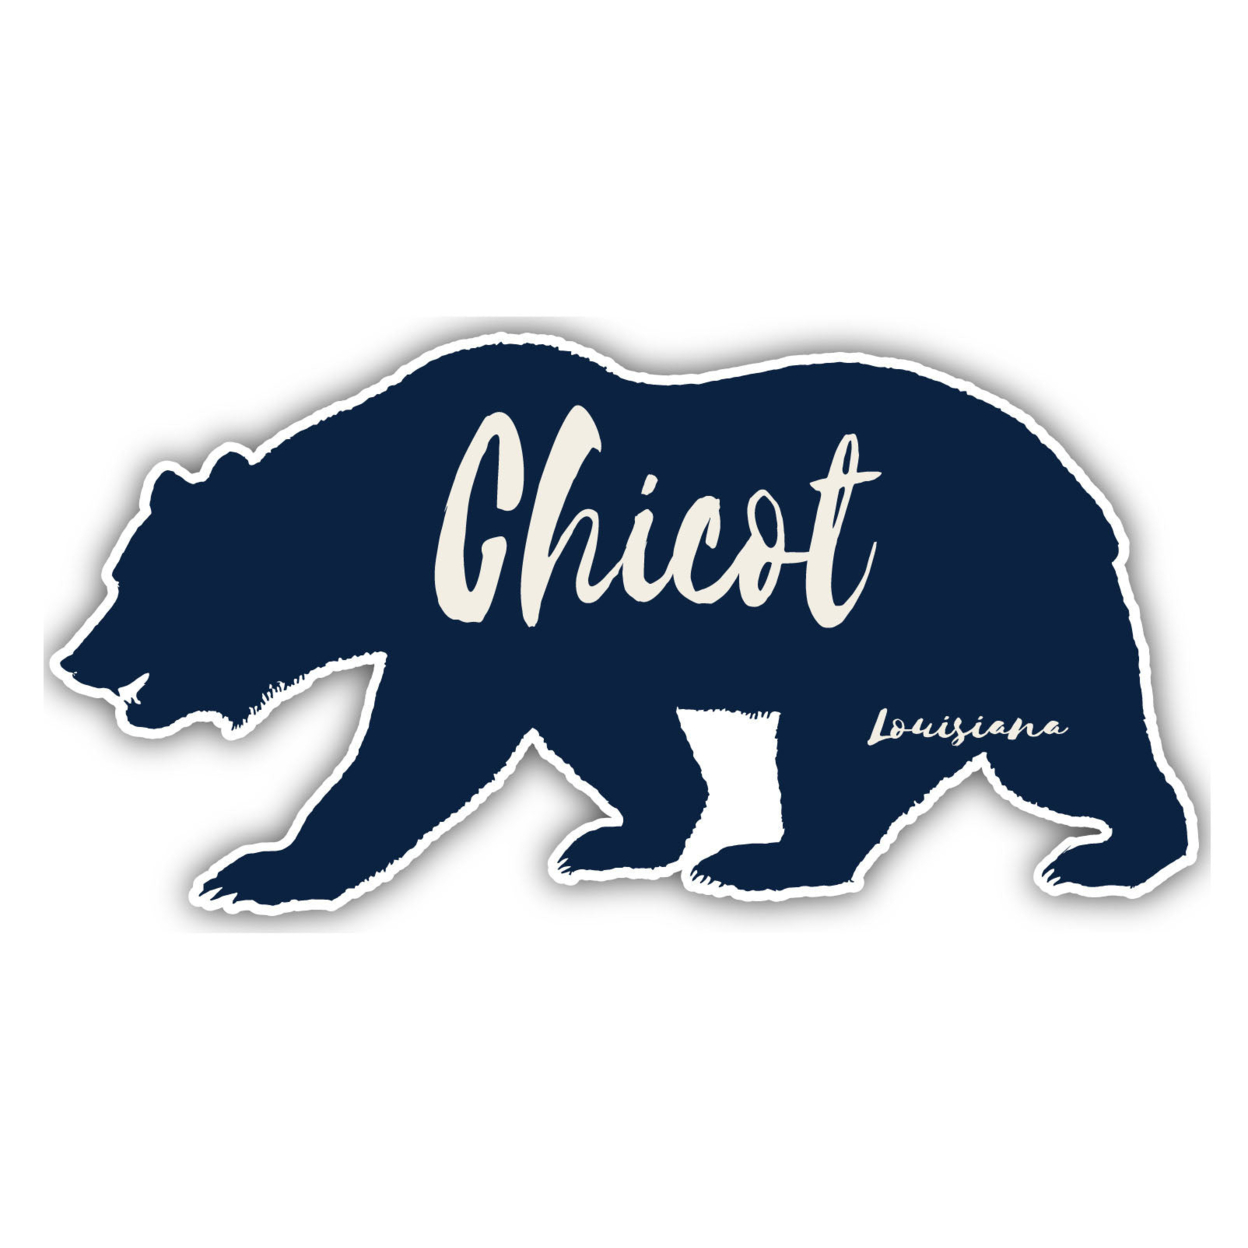 Chicot Louisiana Souvenir Decorative Stickers (Choose Theme And Size) - 4-Pack, 12-Inch, Bear